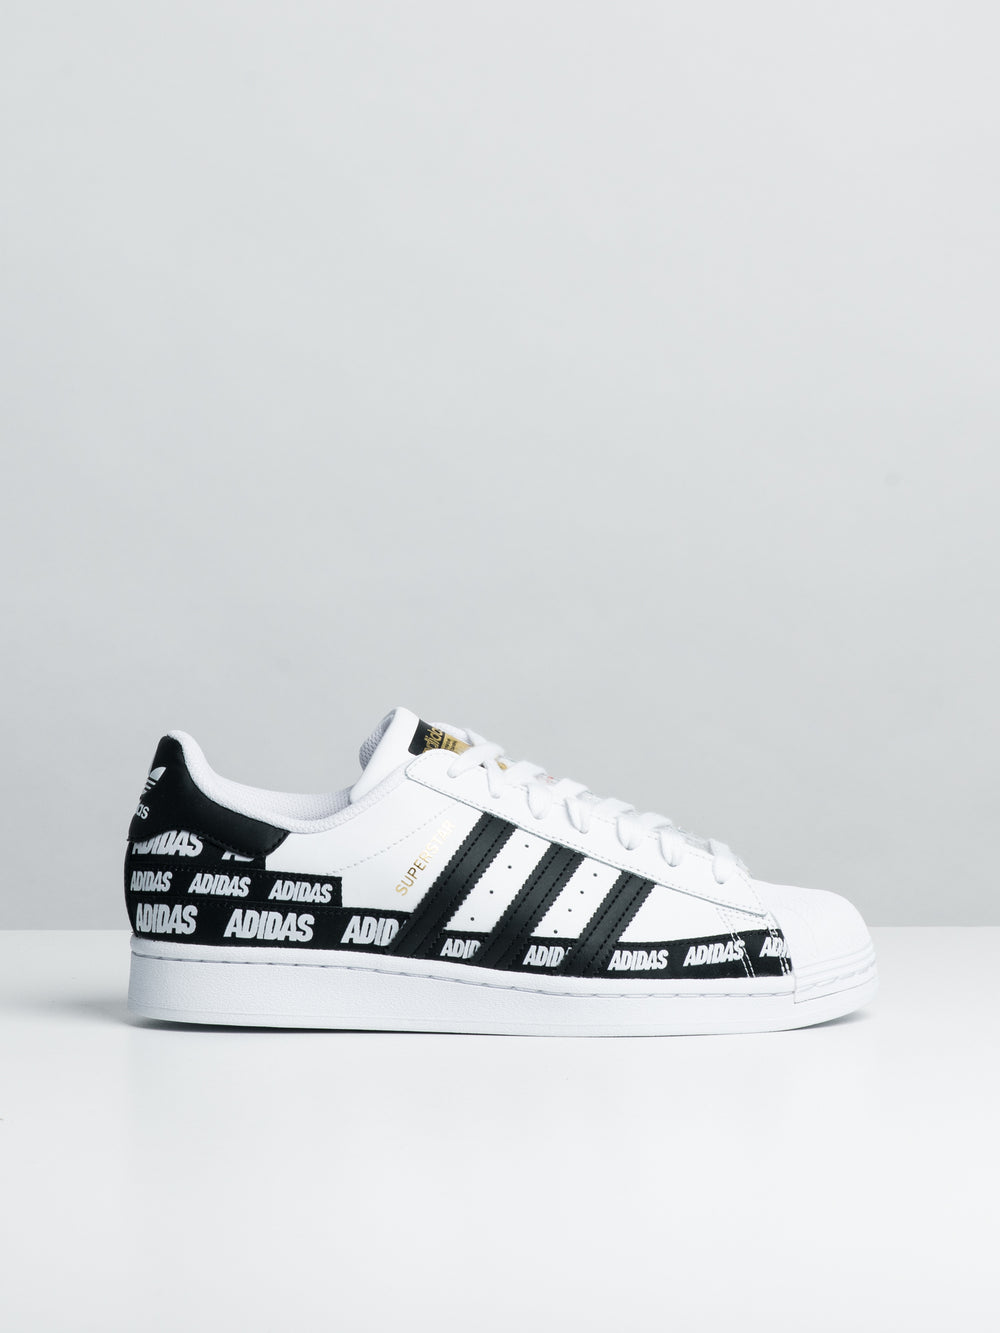 MENS ADIDAS SUPERSTAR SNEAKERS - WHITE/BLACK - CLEARANCE